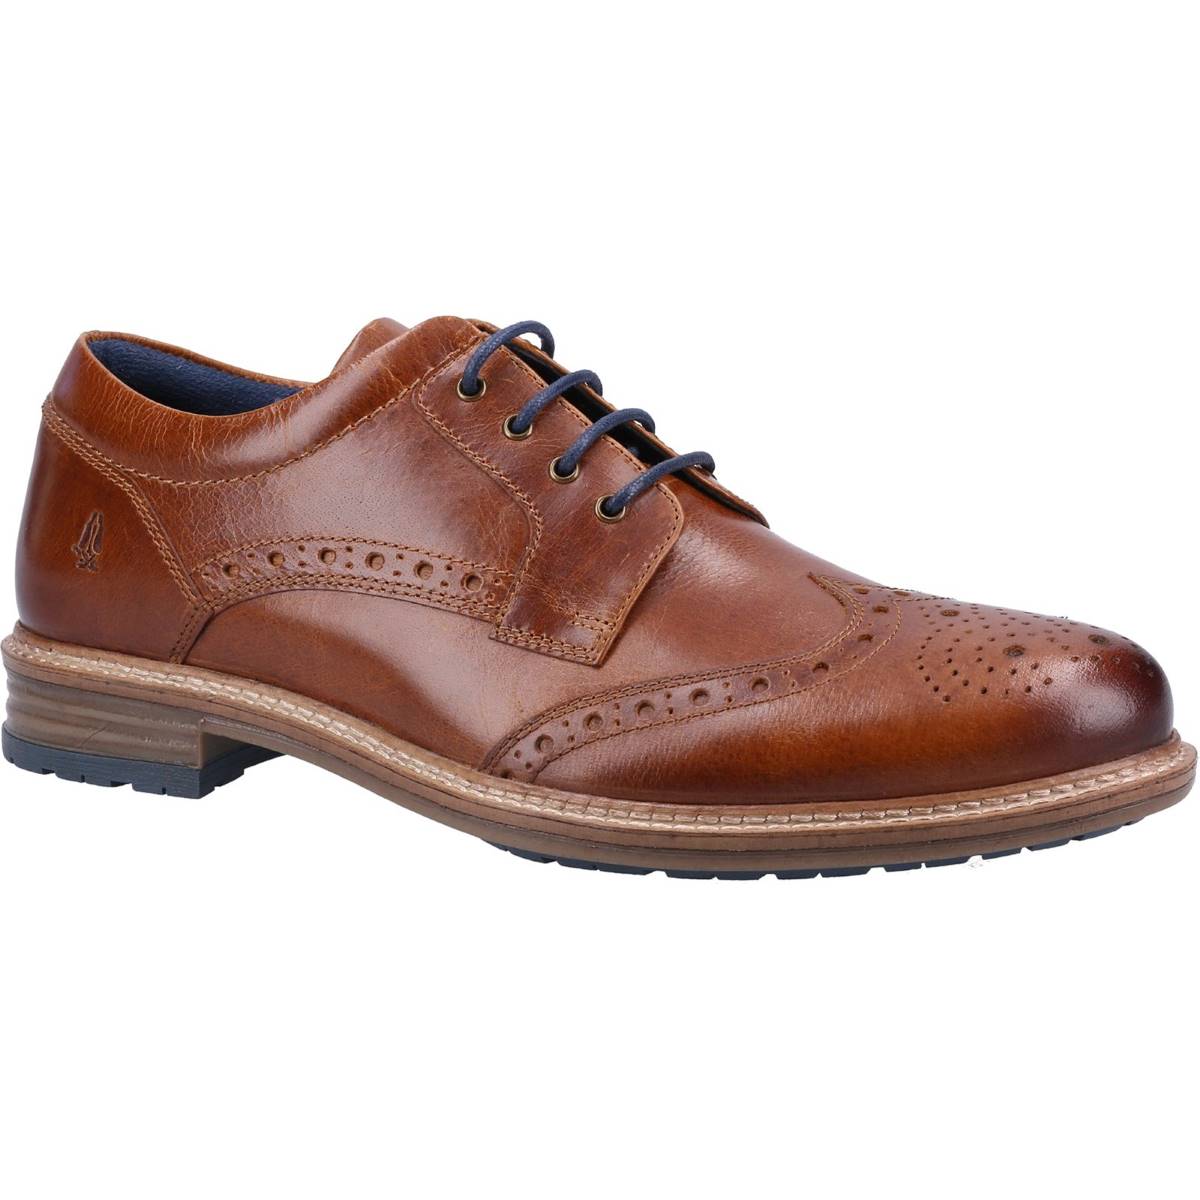 Hush Puppies Jayden Brogue Tan Mens formal shoes HP-36710-68545 in a Plain Leather in Size 10